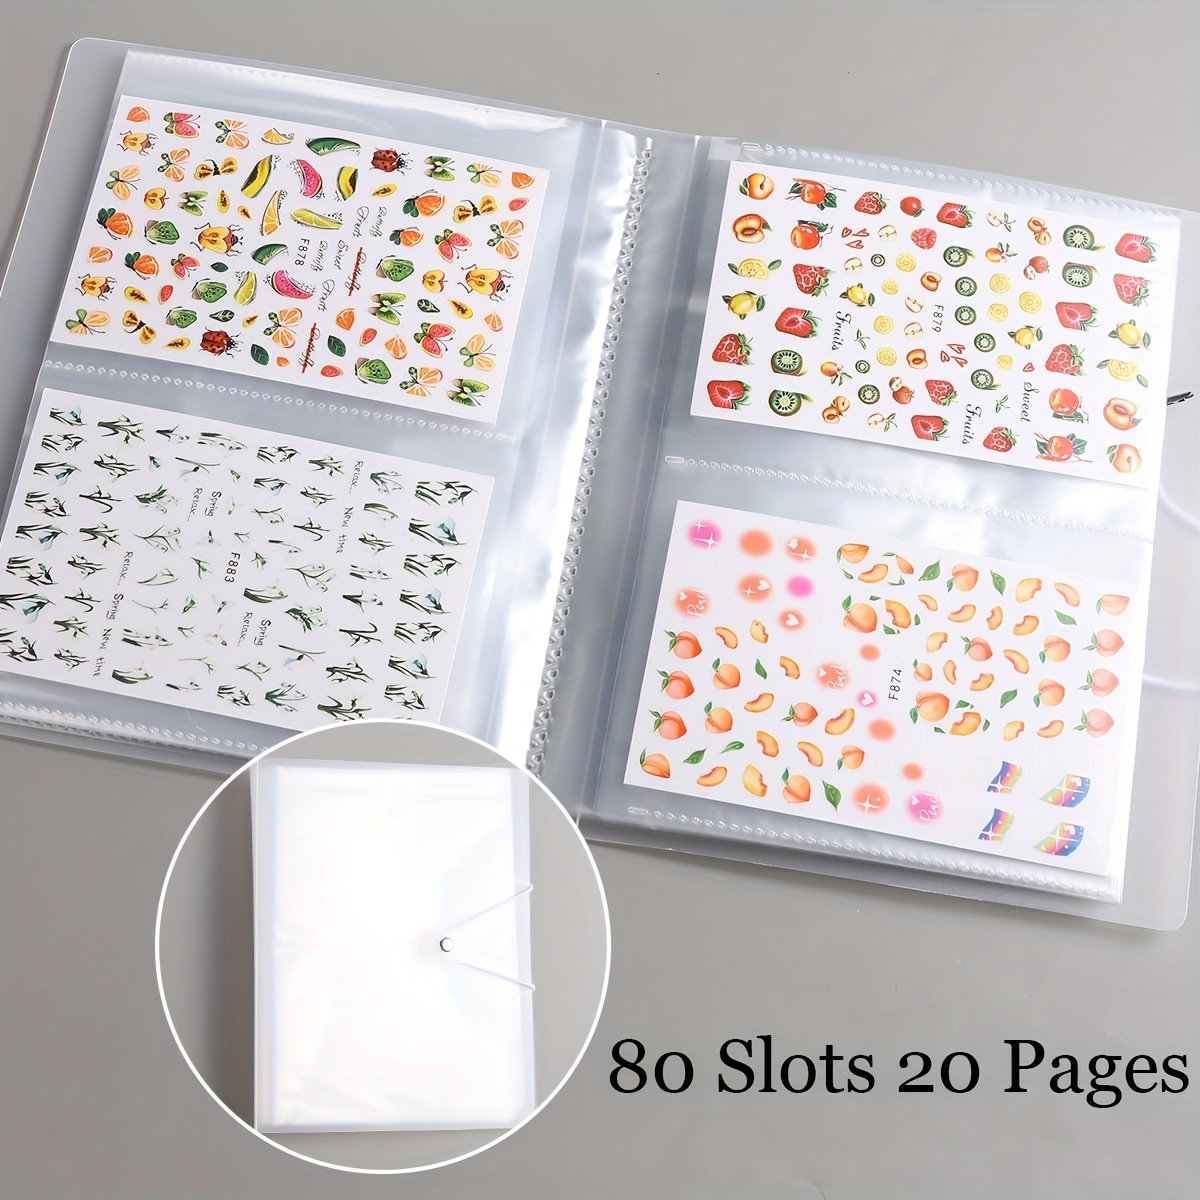 

80/84 Slots Nail Art Stickers Storage Book Empty Album Decals Collecting Organizer Holder Display Notebook Manicure Tools